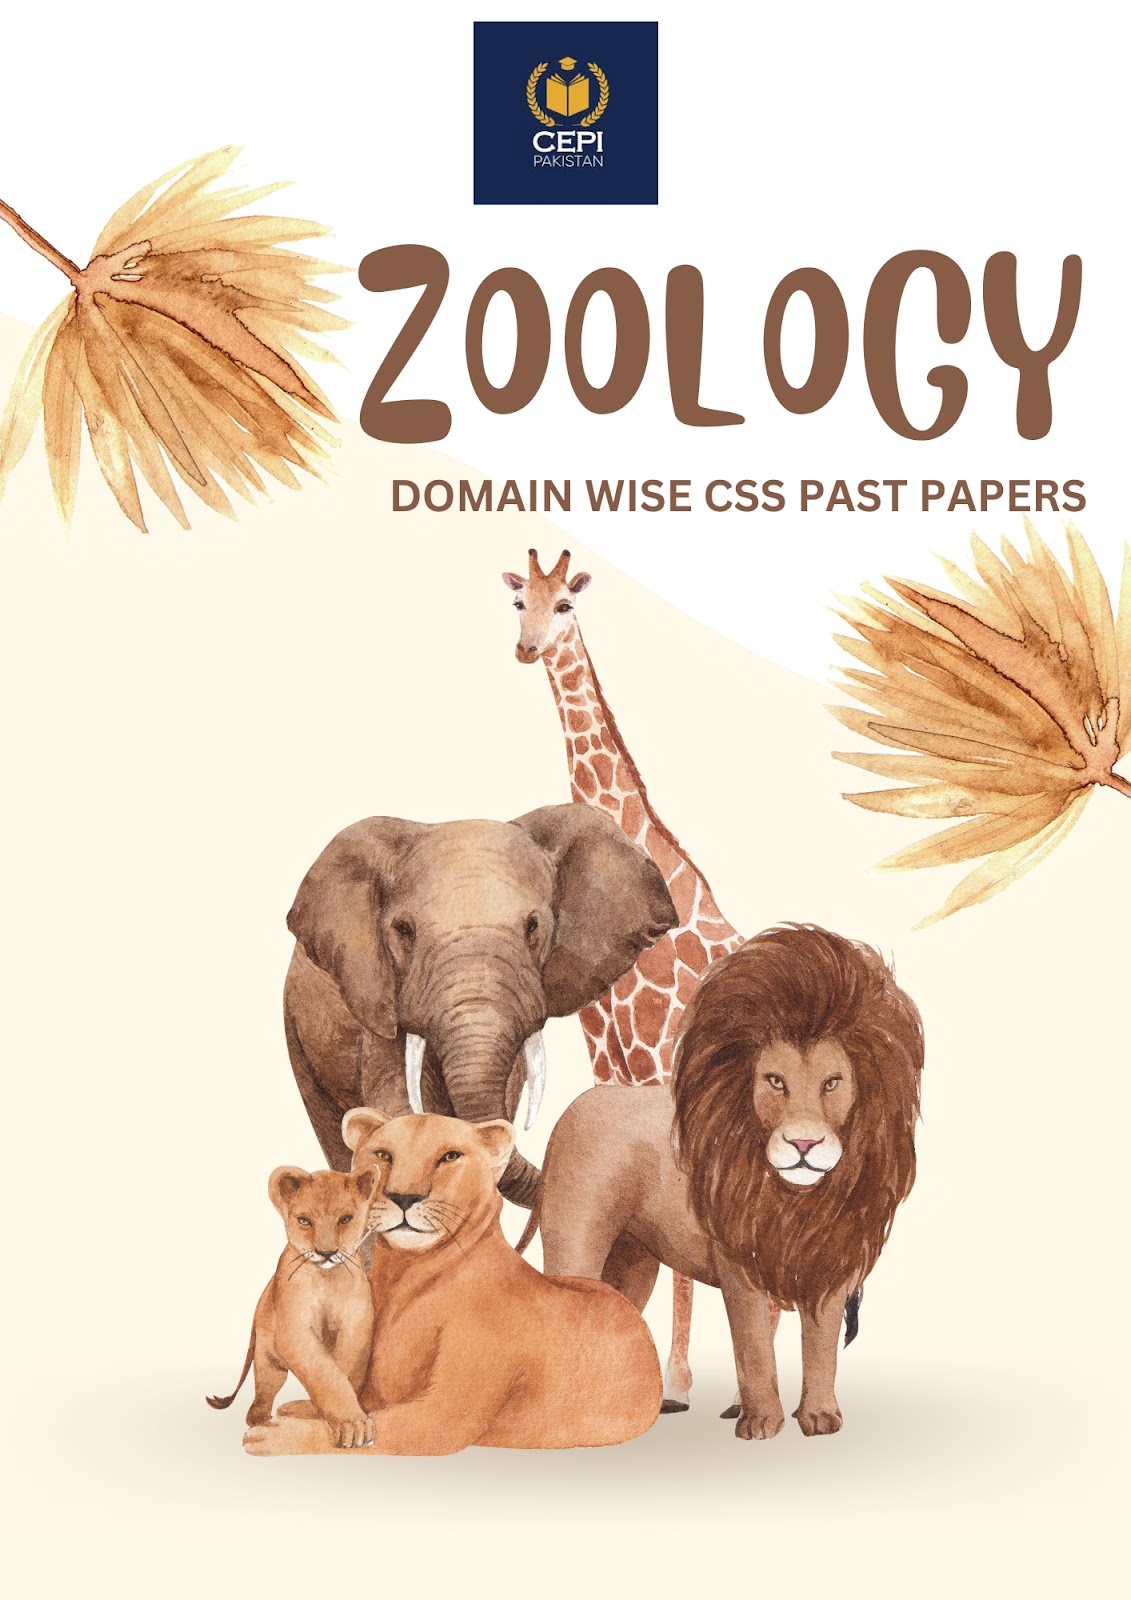 OG5-4 CSS Zoology (Past Papers / Domain-wise) Prepared By CEPI Pakistan